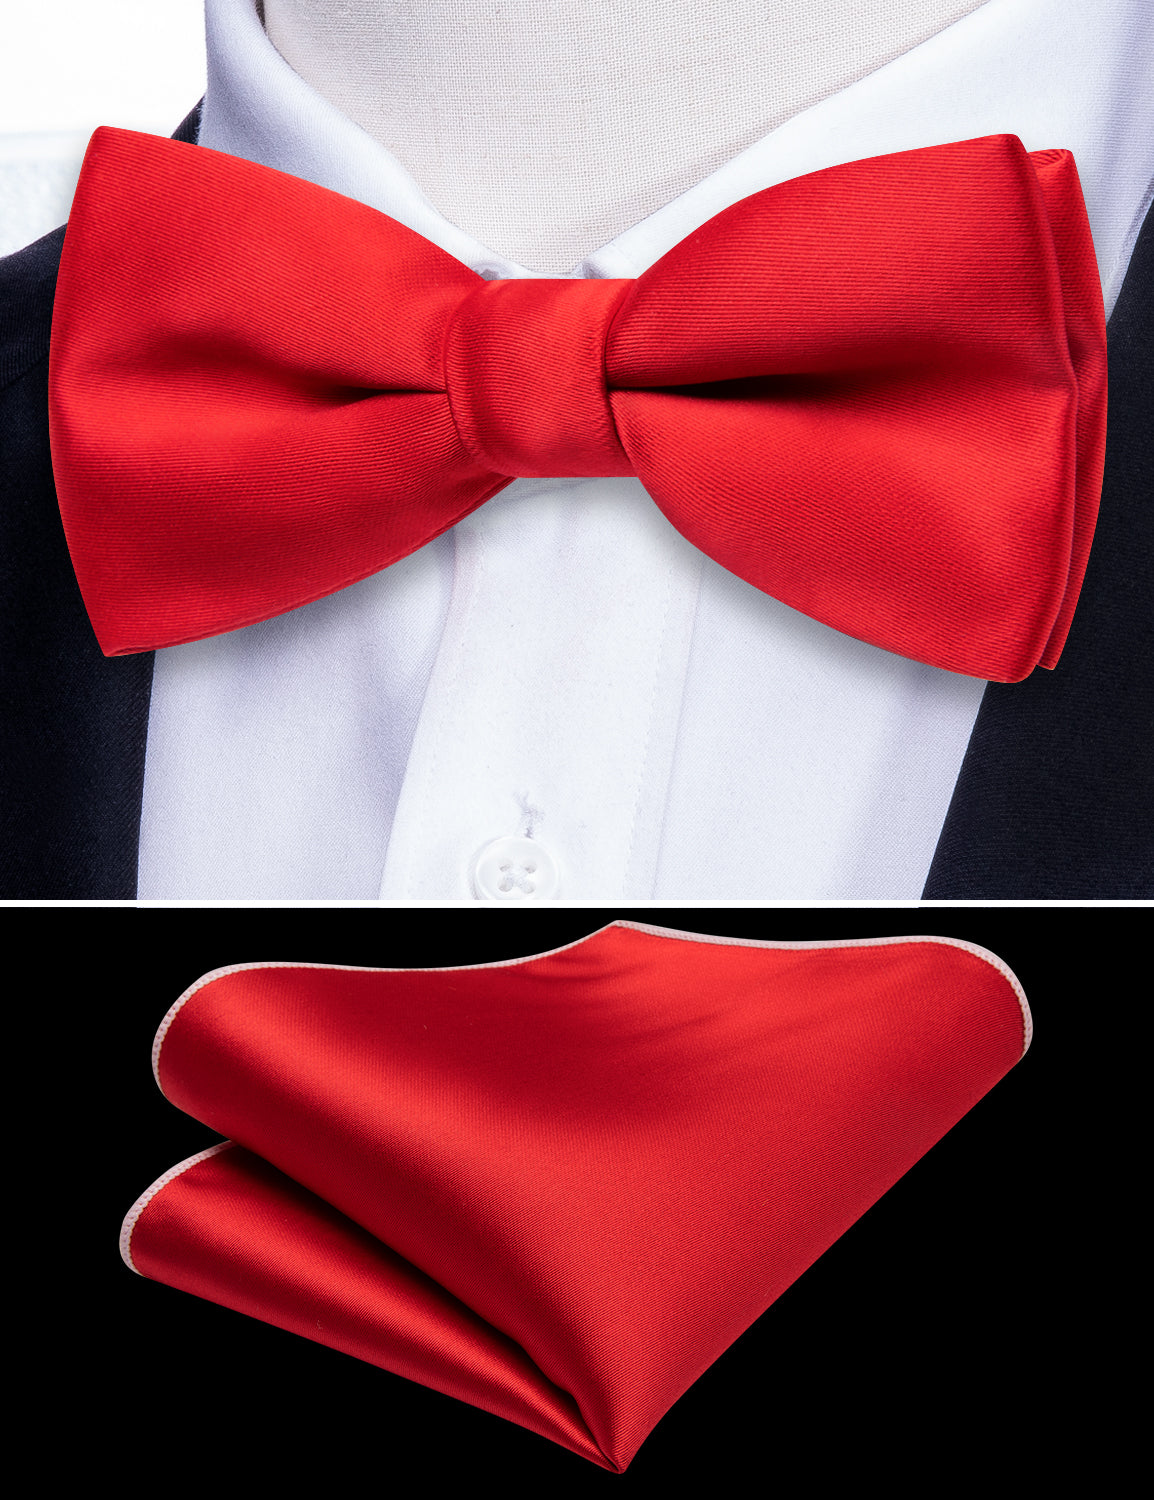 Barry.Wang Kids Tie Red Solid Children's Silk Bow Tie Pocket Square Set